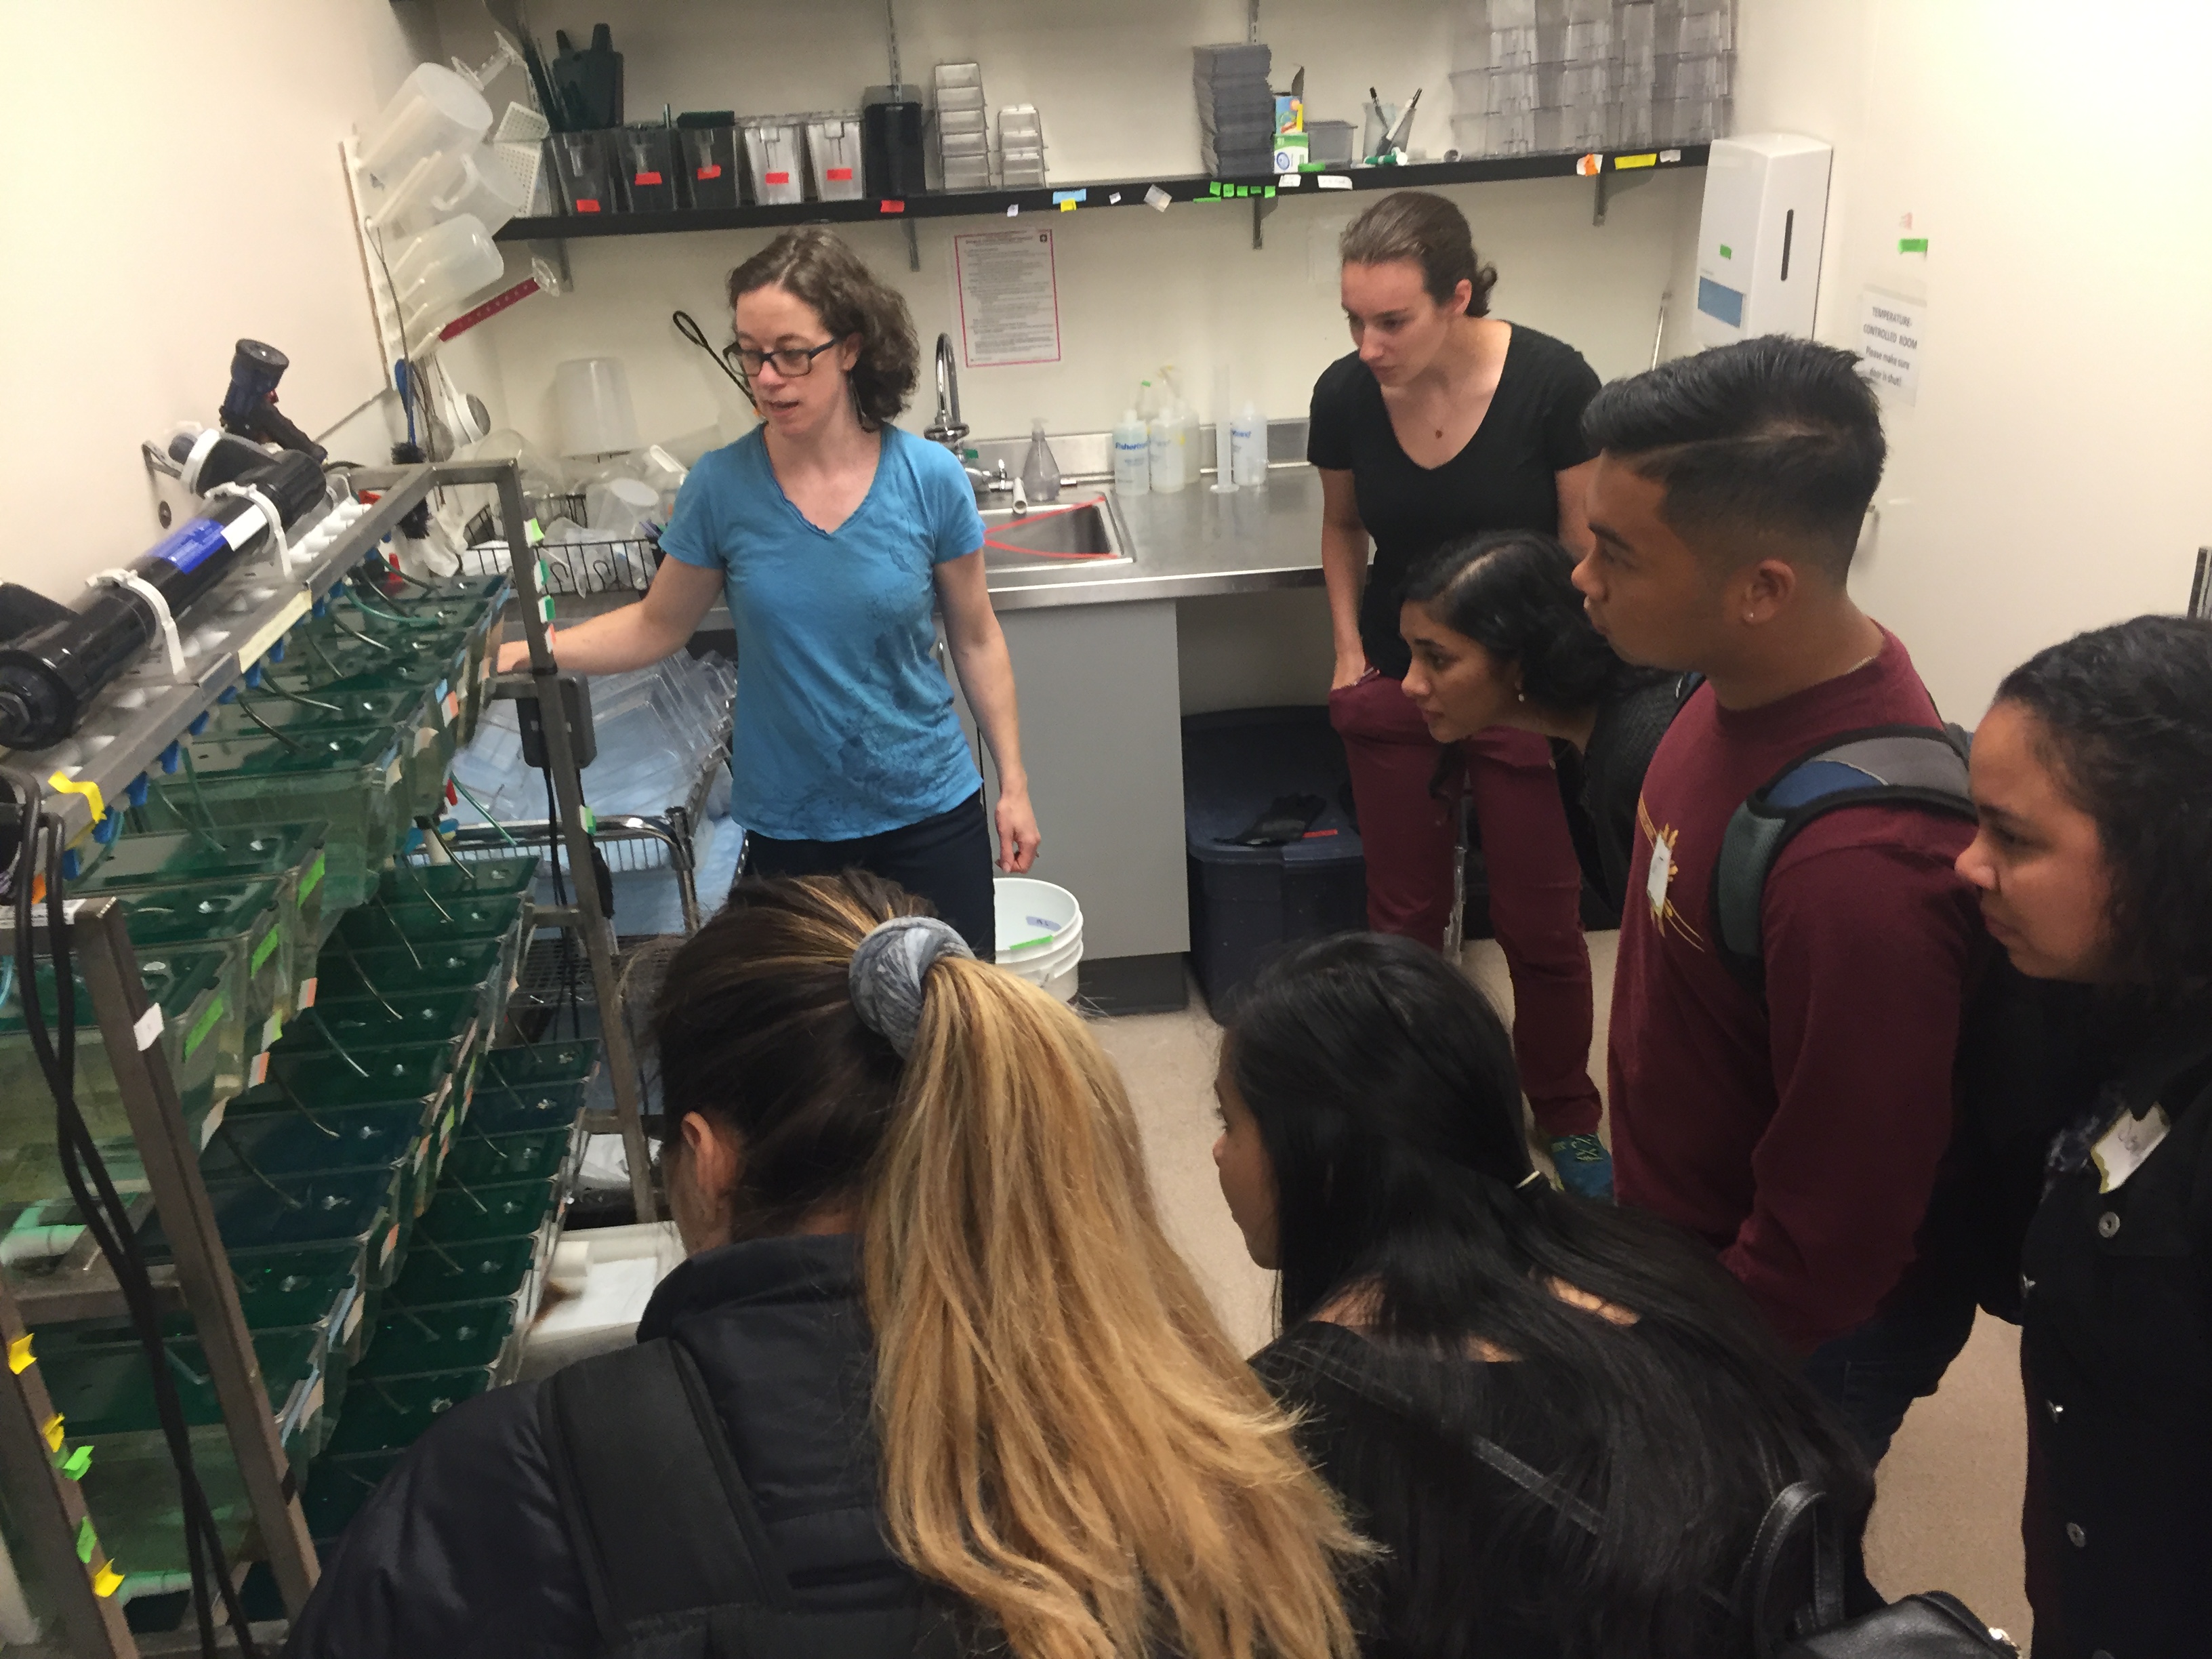 Postdoctoral researcher, Margaret Mills, shows off tanks of zebrafish in the Gallagher lab.